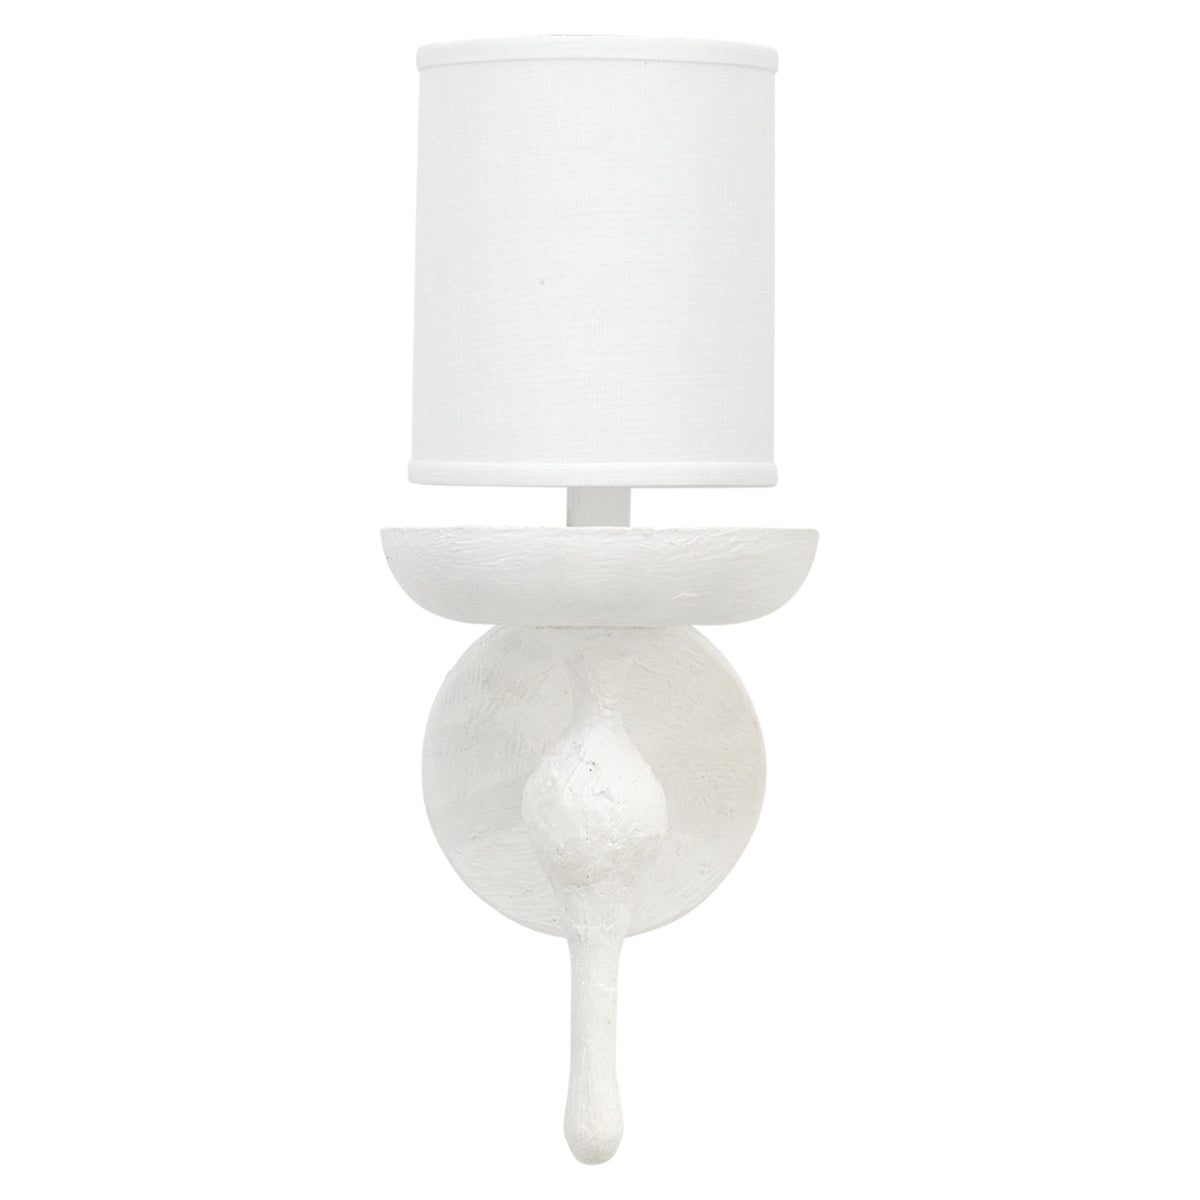 Jamie Young Company - 4CONC-SCWH - Concord Wall Sconce - Concord - White